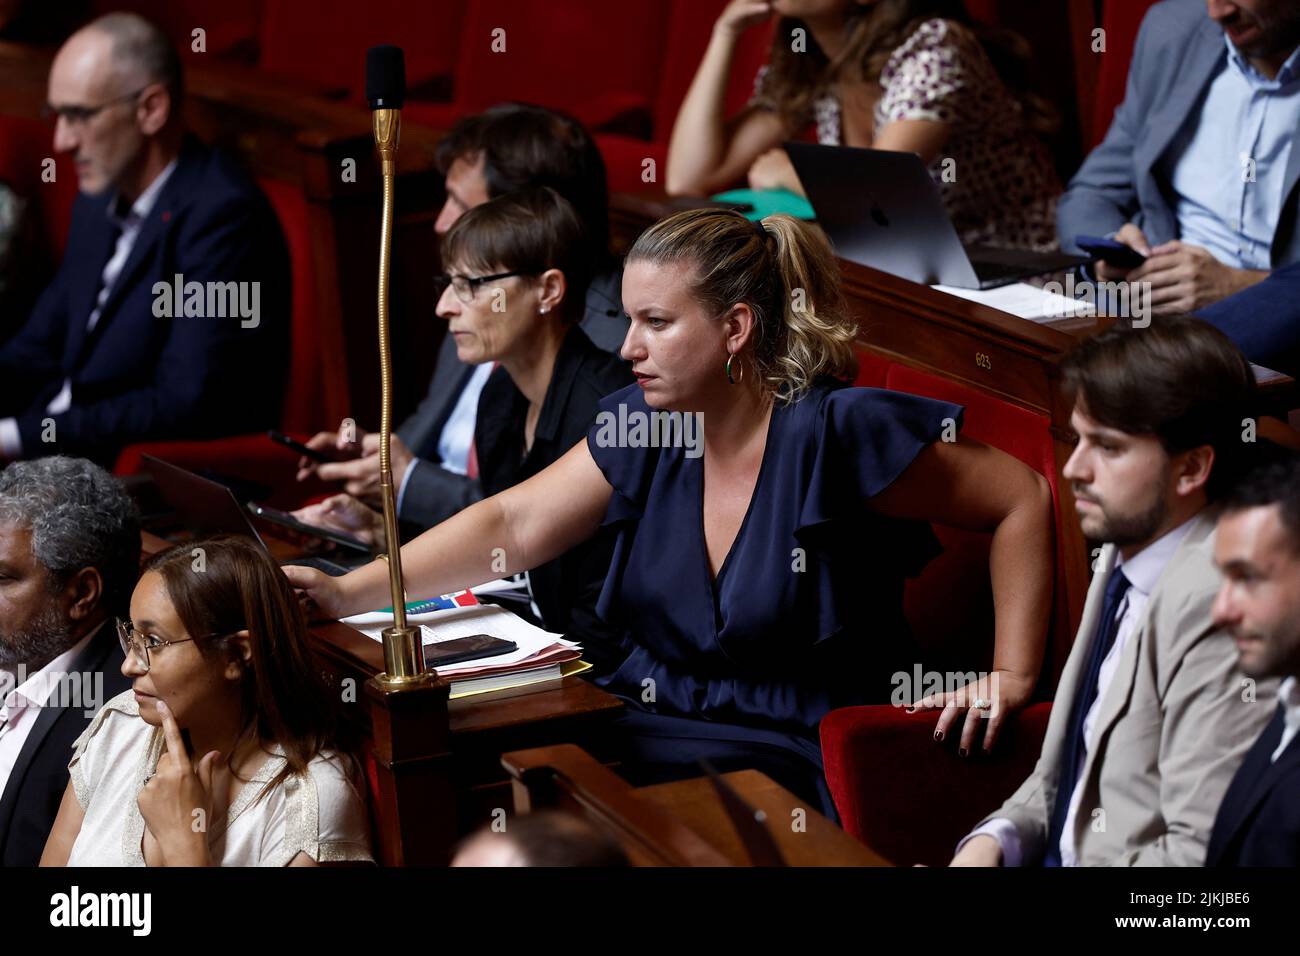 Mathilde Panot, MP and President of the French far-left opposition party La France Insoumise (France Unbowed) parliamentary group attends the questions to the government session at the National Assembly in Paris, France, August 2, 2022. REUTERS/Benoit Tessier Stock Photo